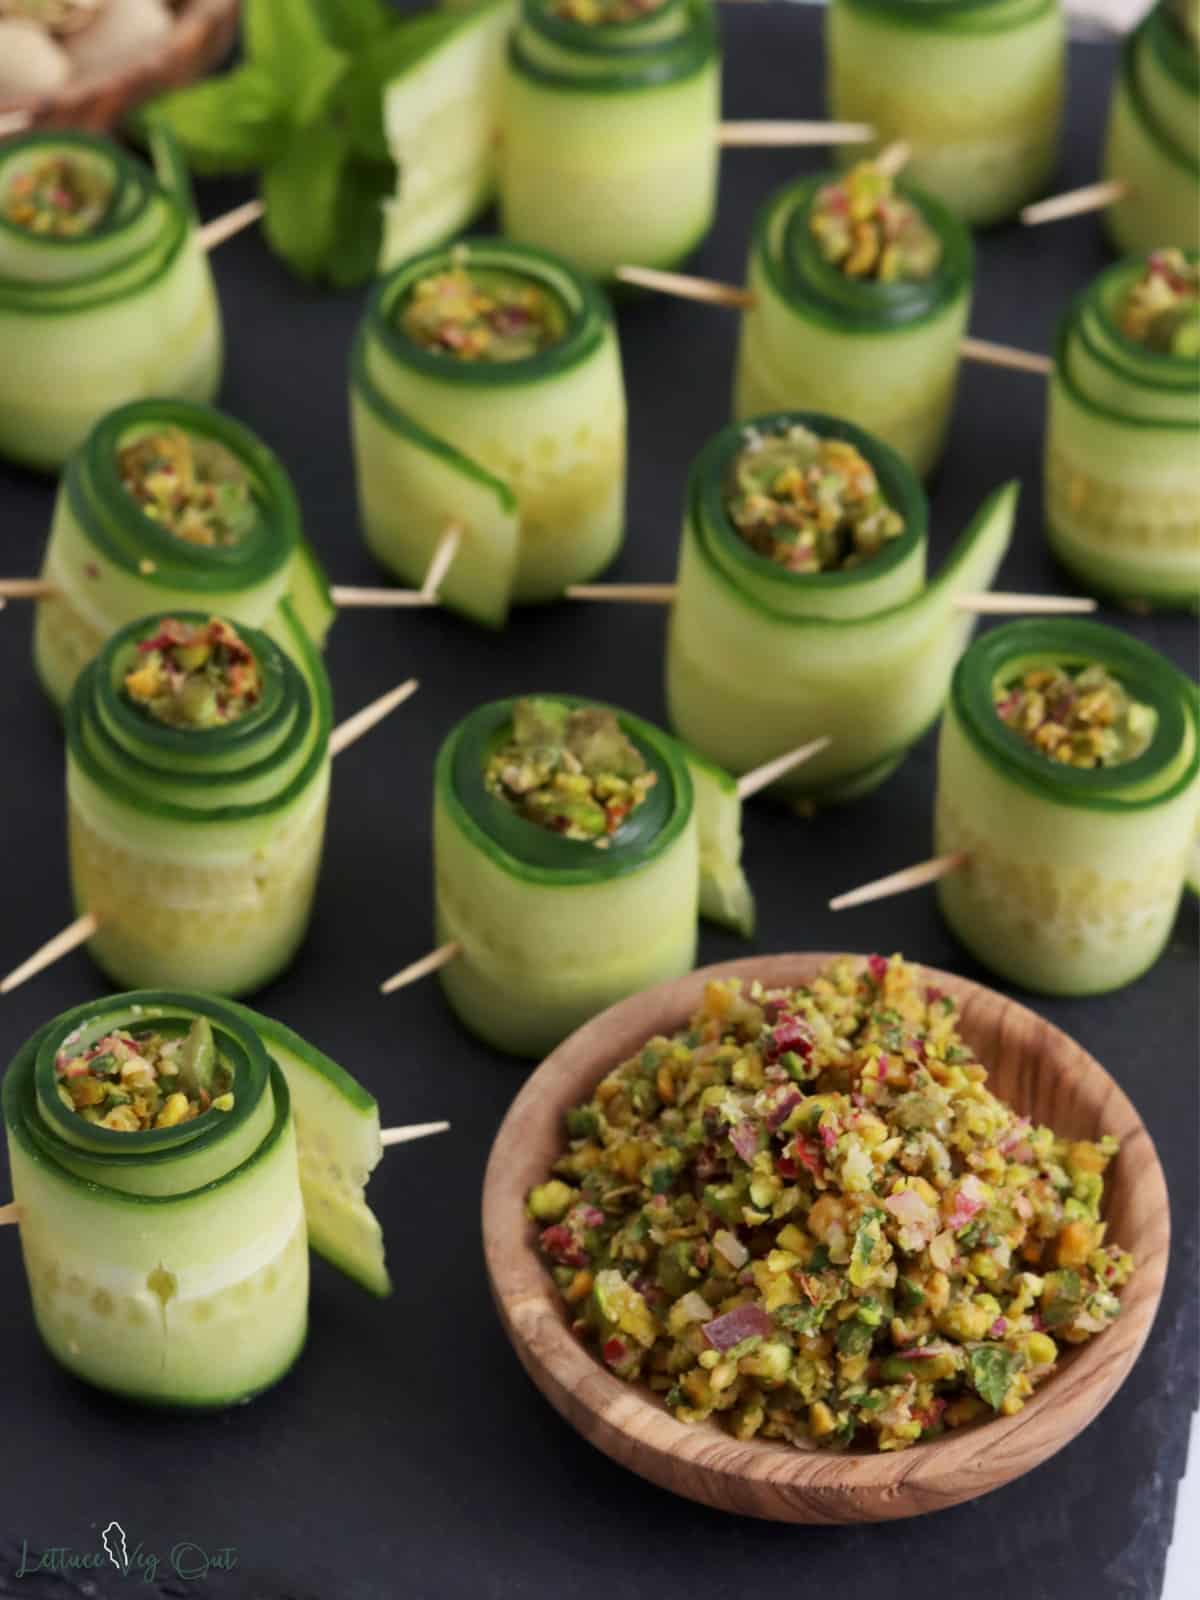 Small dish of ground pistachio filling in front of cucumber roll ups.